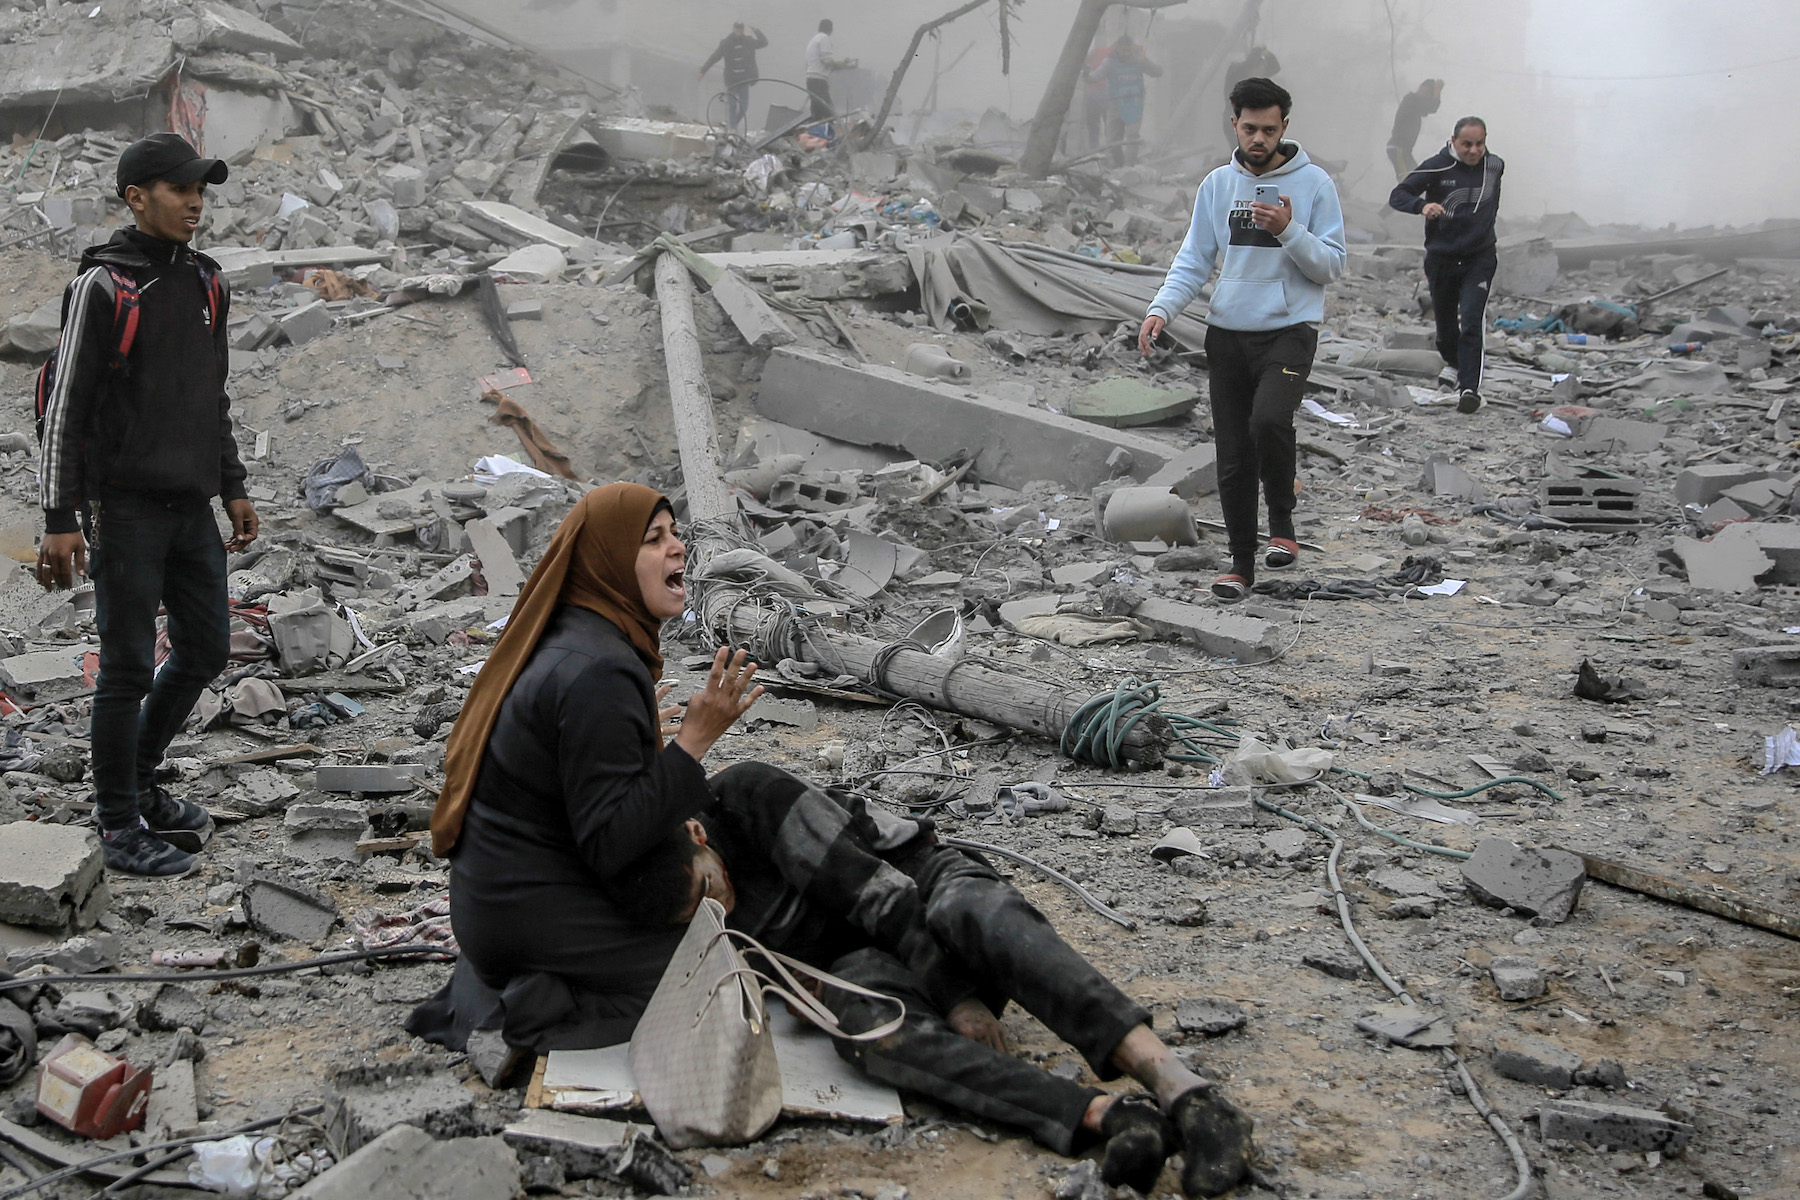 Israel attacks kill mostly children and women in gaza